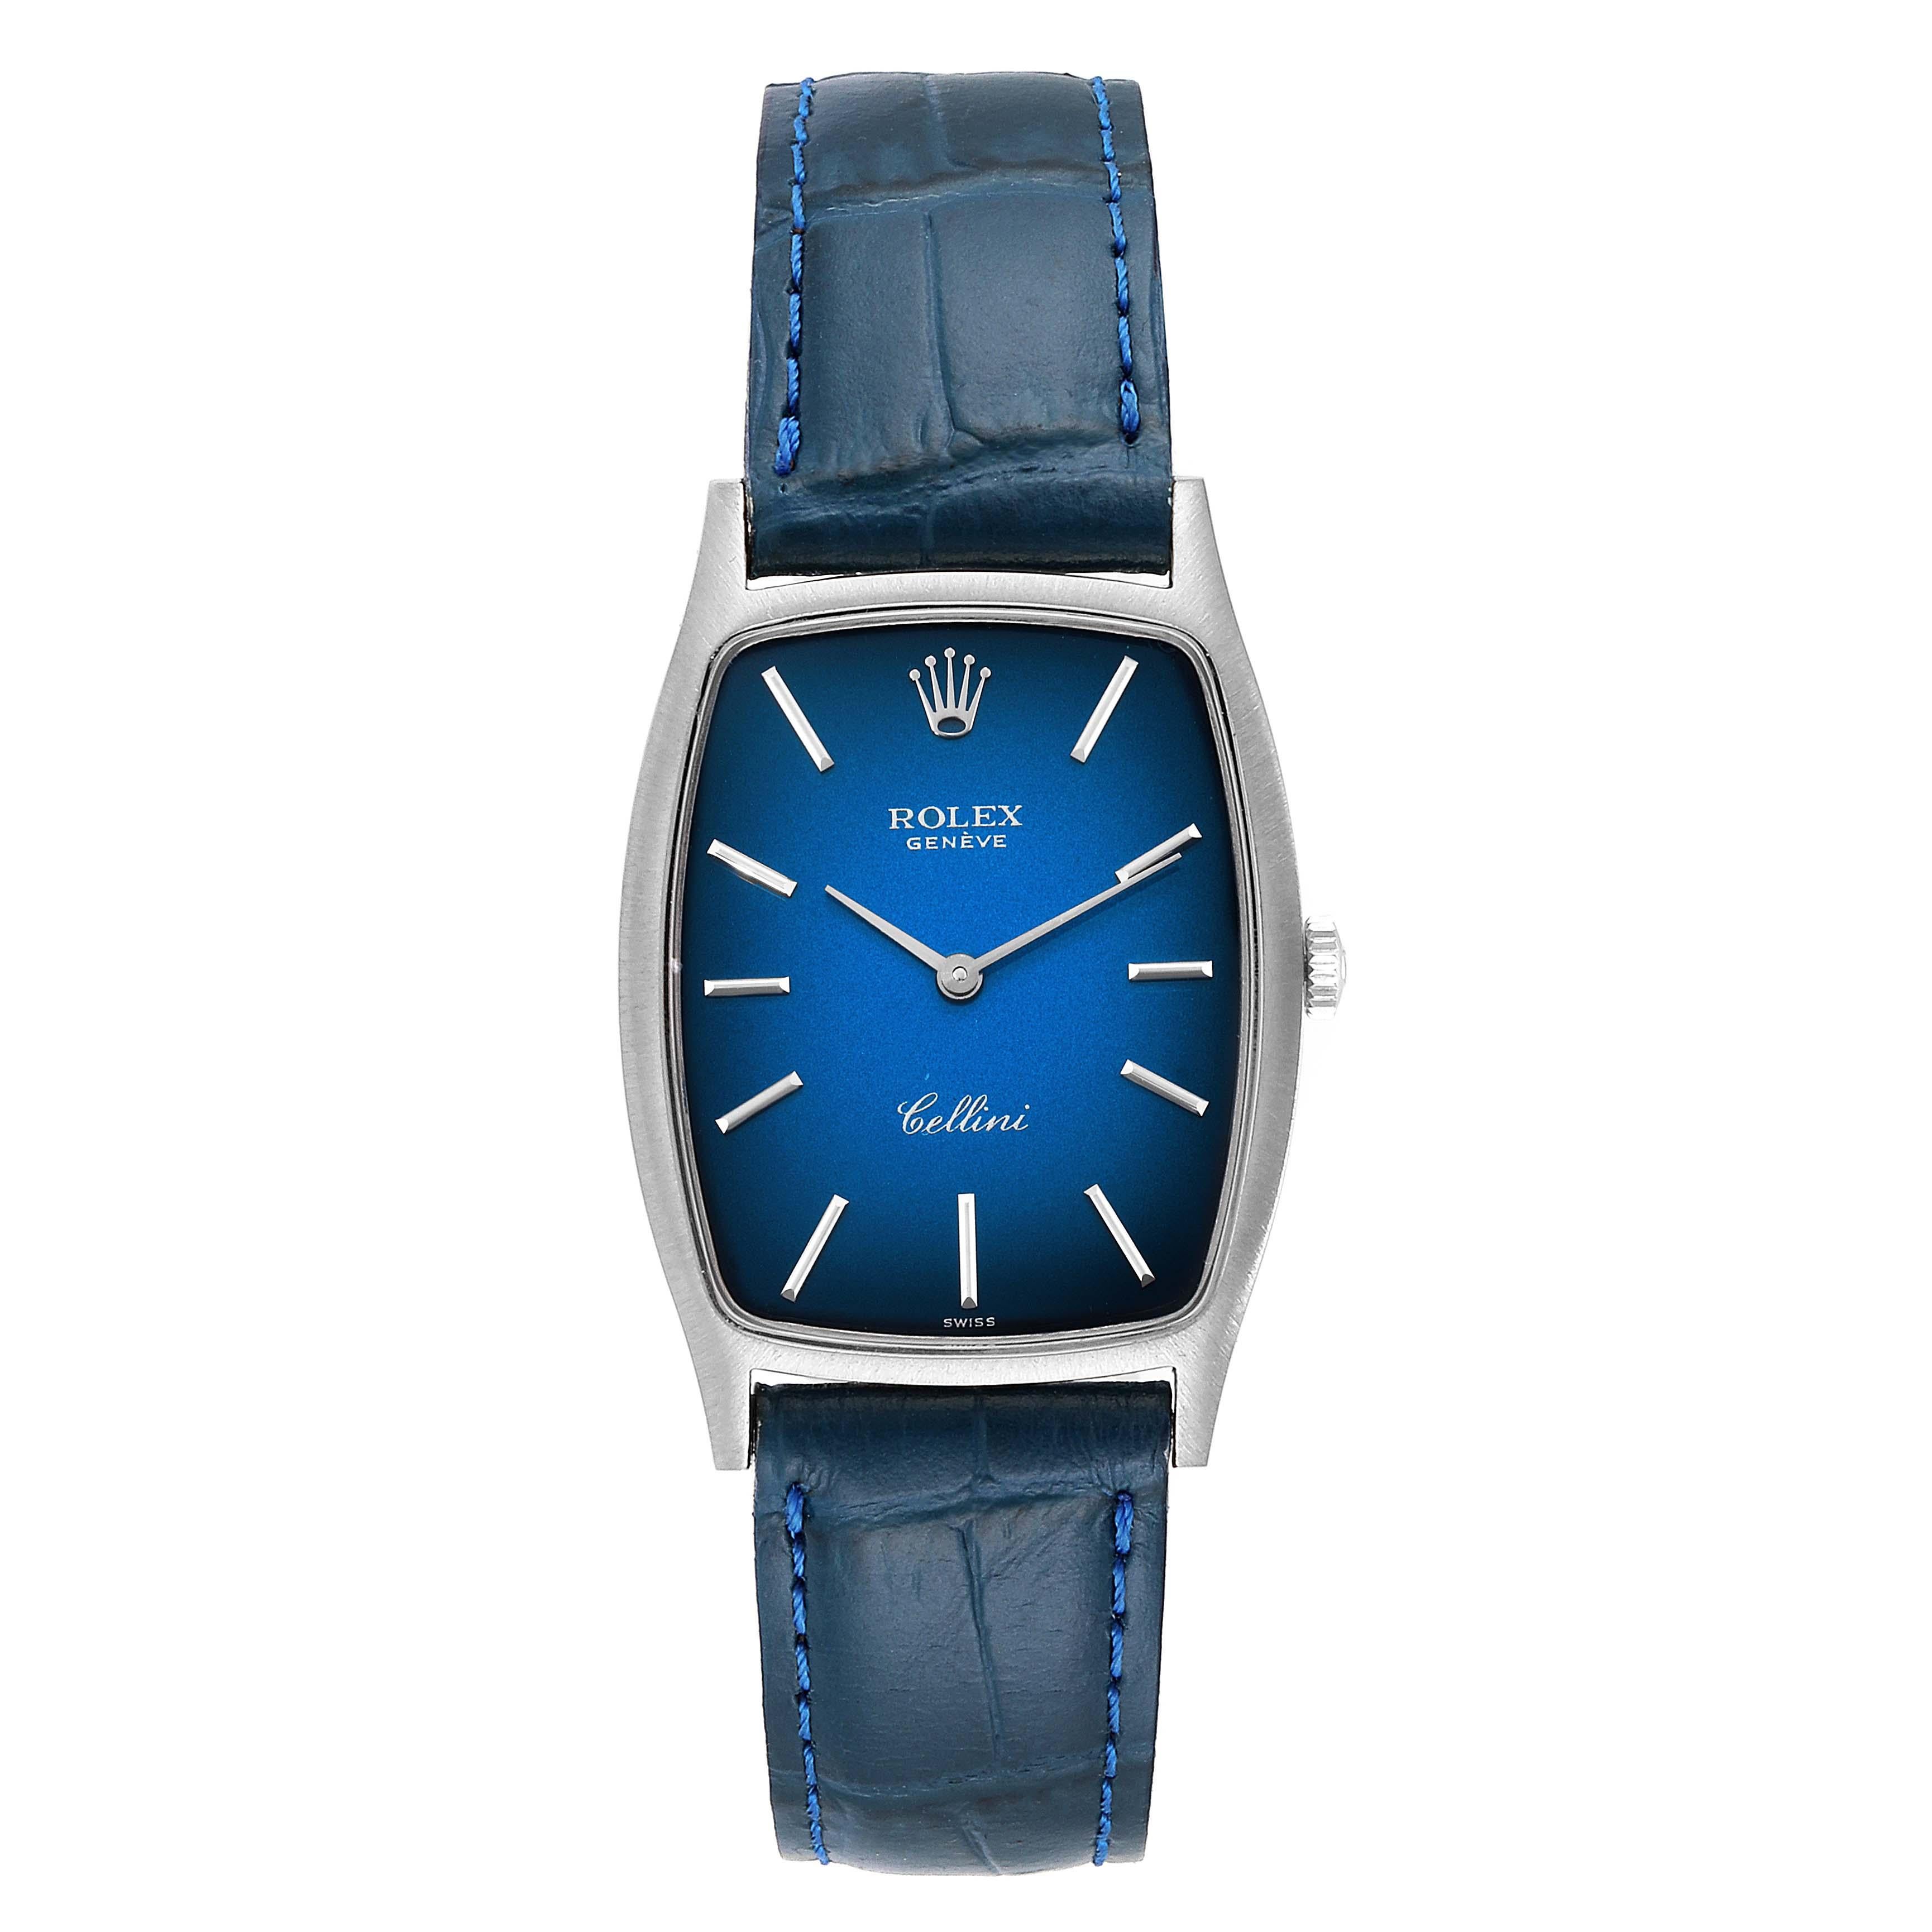 Rolex Cellini White Gold Blue Vignette Dial Vintage Ladies Watch 3807. Manual winding movement. 18k white gold tonneau shaped case 26.0 x 37.0 mm. Rolex logo on a crown. . Mineral glass crystal. Blue vignette dial with gold baton hour markers and